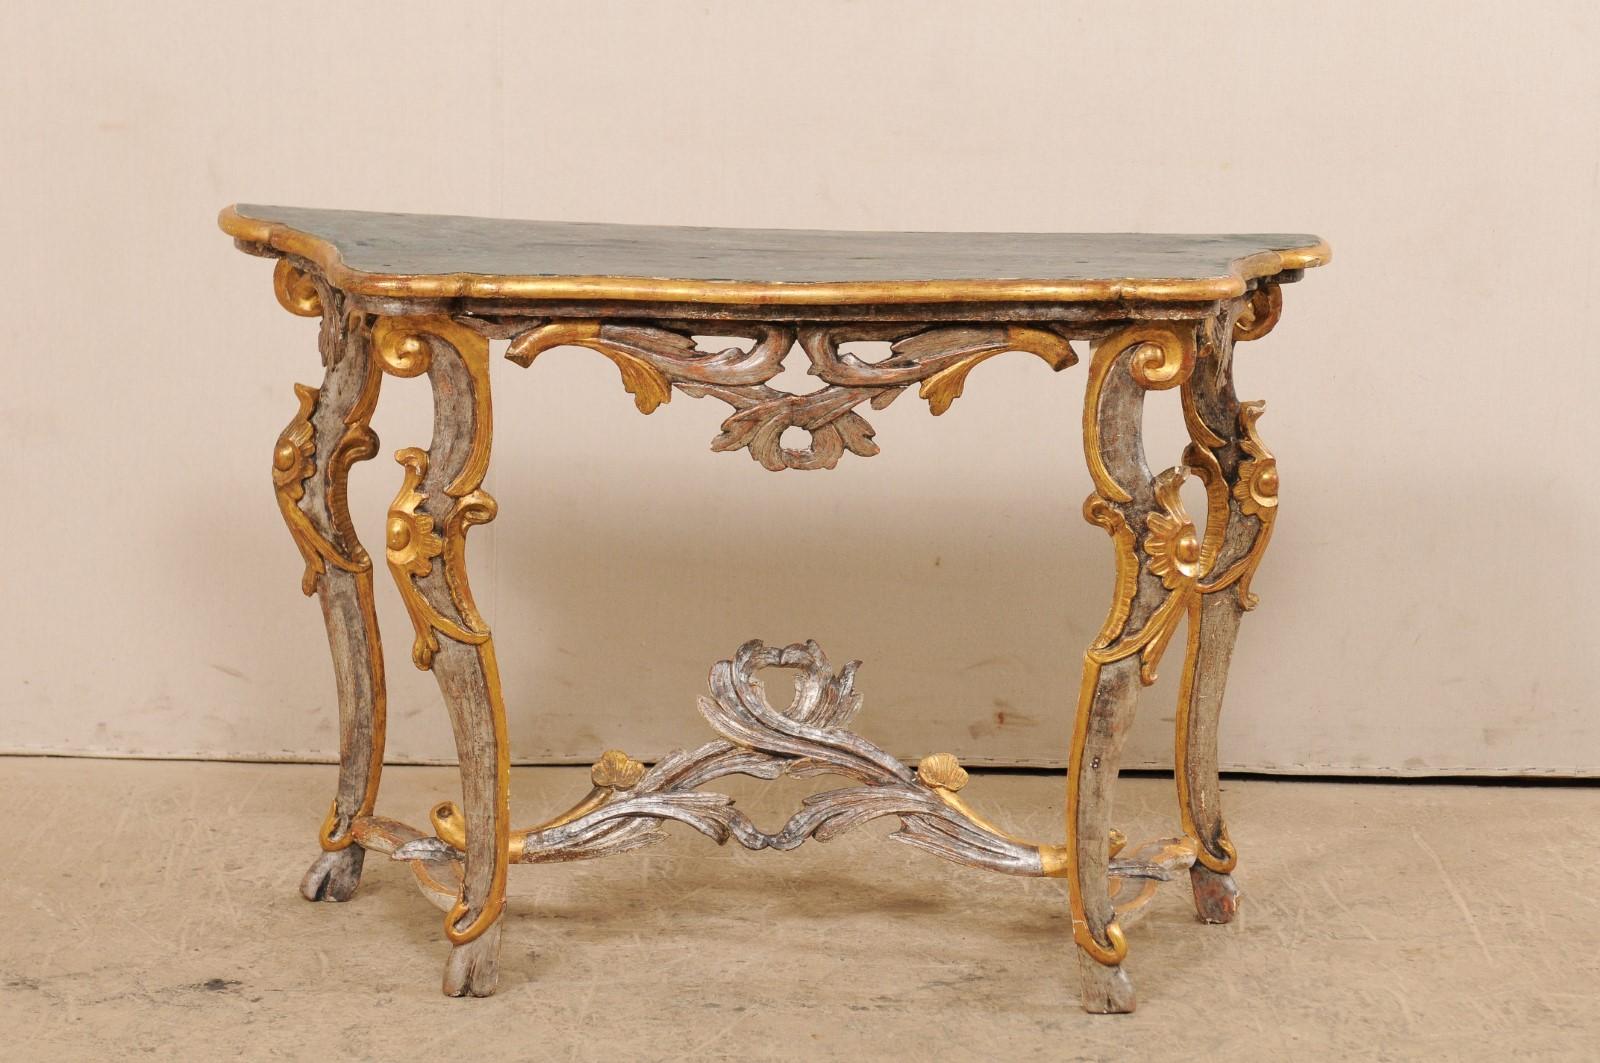 An Italian carved and gilded console table with faux marble top from the 19th century. This antique console table from Italy features a faux-marbled top, nicely carved and pierced skirt, and raised upon four curvaceous and slender legs, wrapped with